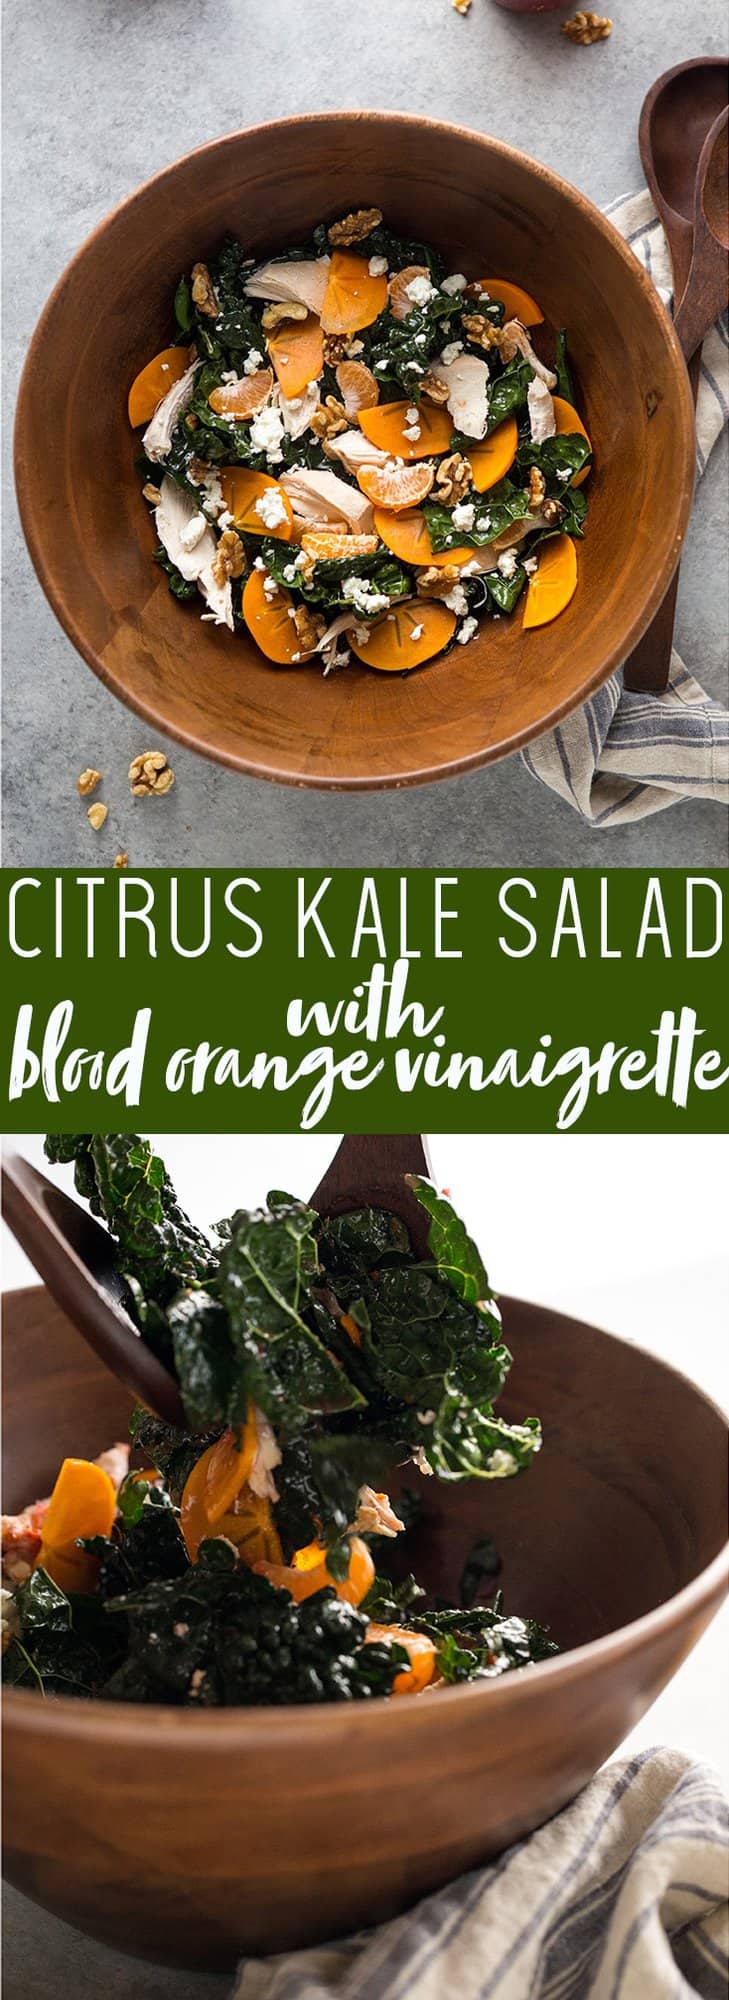 This Citrus Kale Salad with Blood Orange Vinaigrette is a healthy and refreshing winter detox salad. After an indulgent holiday, this is a great way to use up leftover turkey or chicken and get some much needed nutrients between all the crazy holiday eating! Blood orange vinegrette recipe | Leftover turkey recipes | Persimmon recipes | detox salad | Winter Salad recipe | Healthy winter recipe | leftover chicken recipe | recipe to use rotisserie chicken